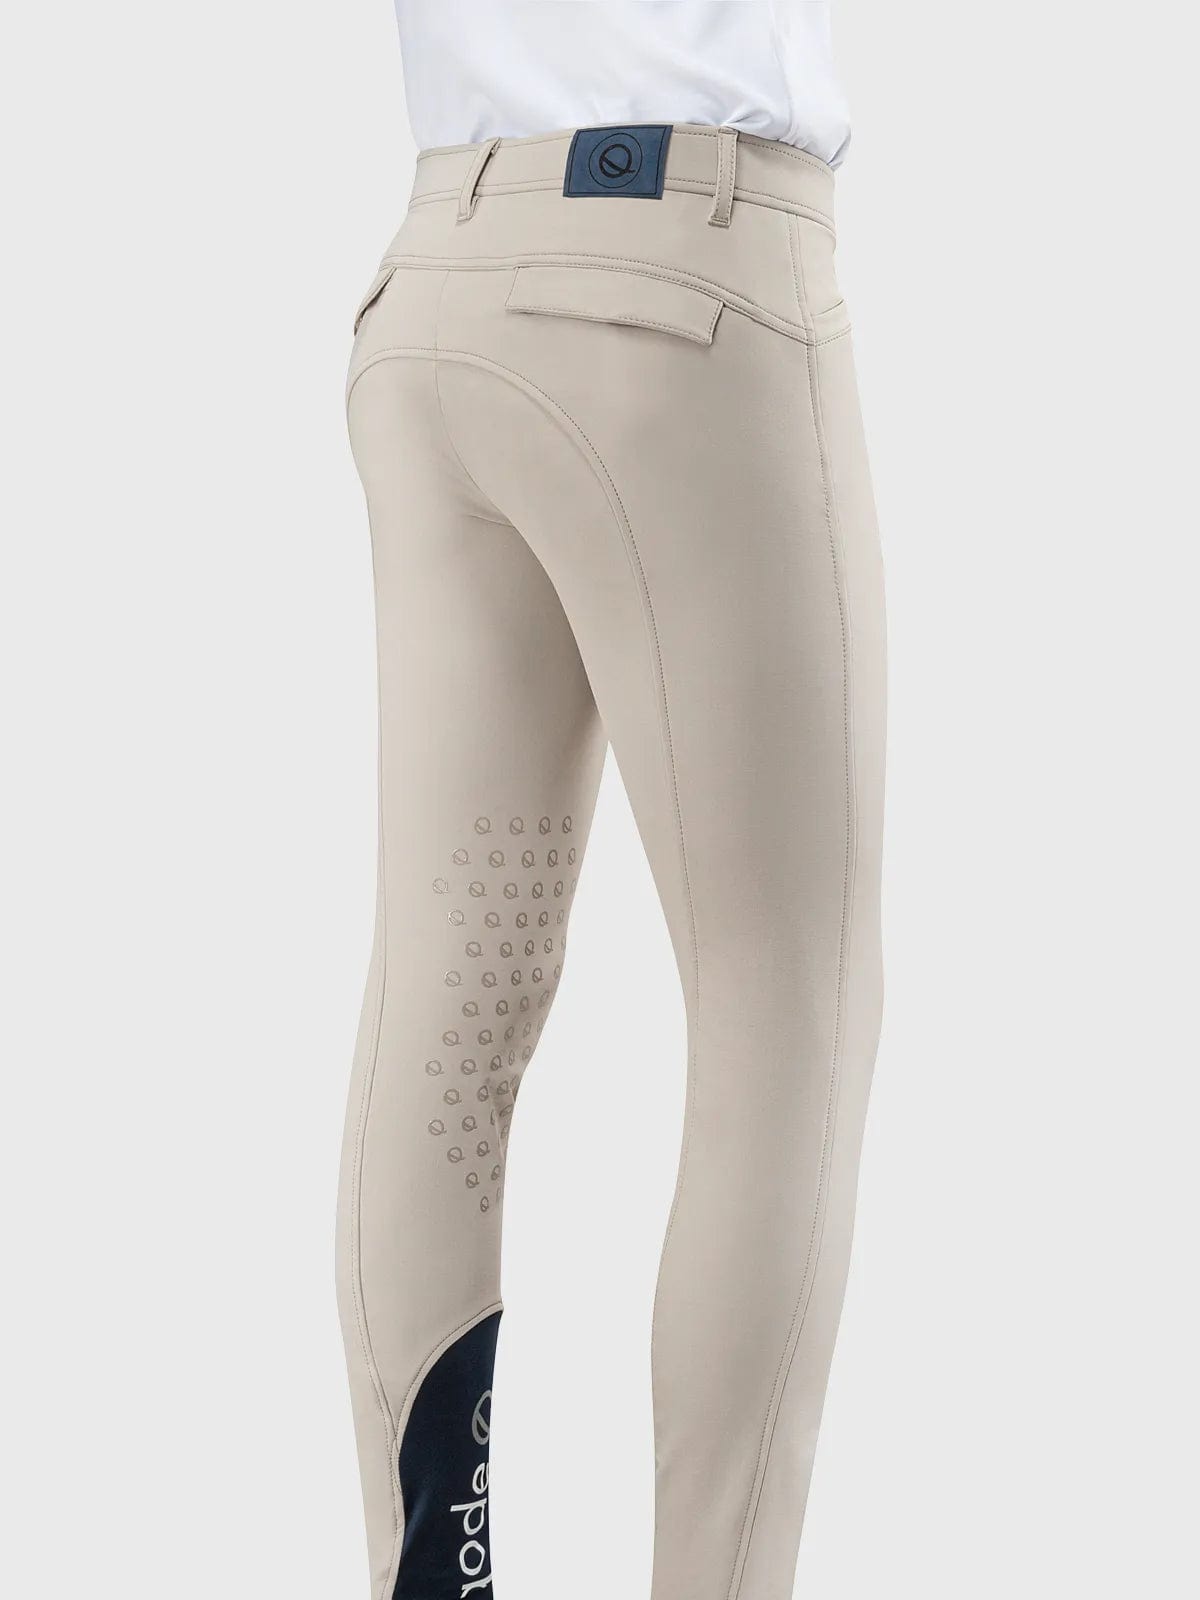 EQODE By Equiline Breeches EQODE MEN'S BREECHES WITH KNEE GRIP equestrian team apparel online tack store mobile tack store custom farm apparel custom show stable clothing equestrian lifestyle horse show clothing riding clothes horses equestrian tack store